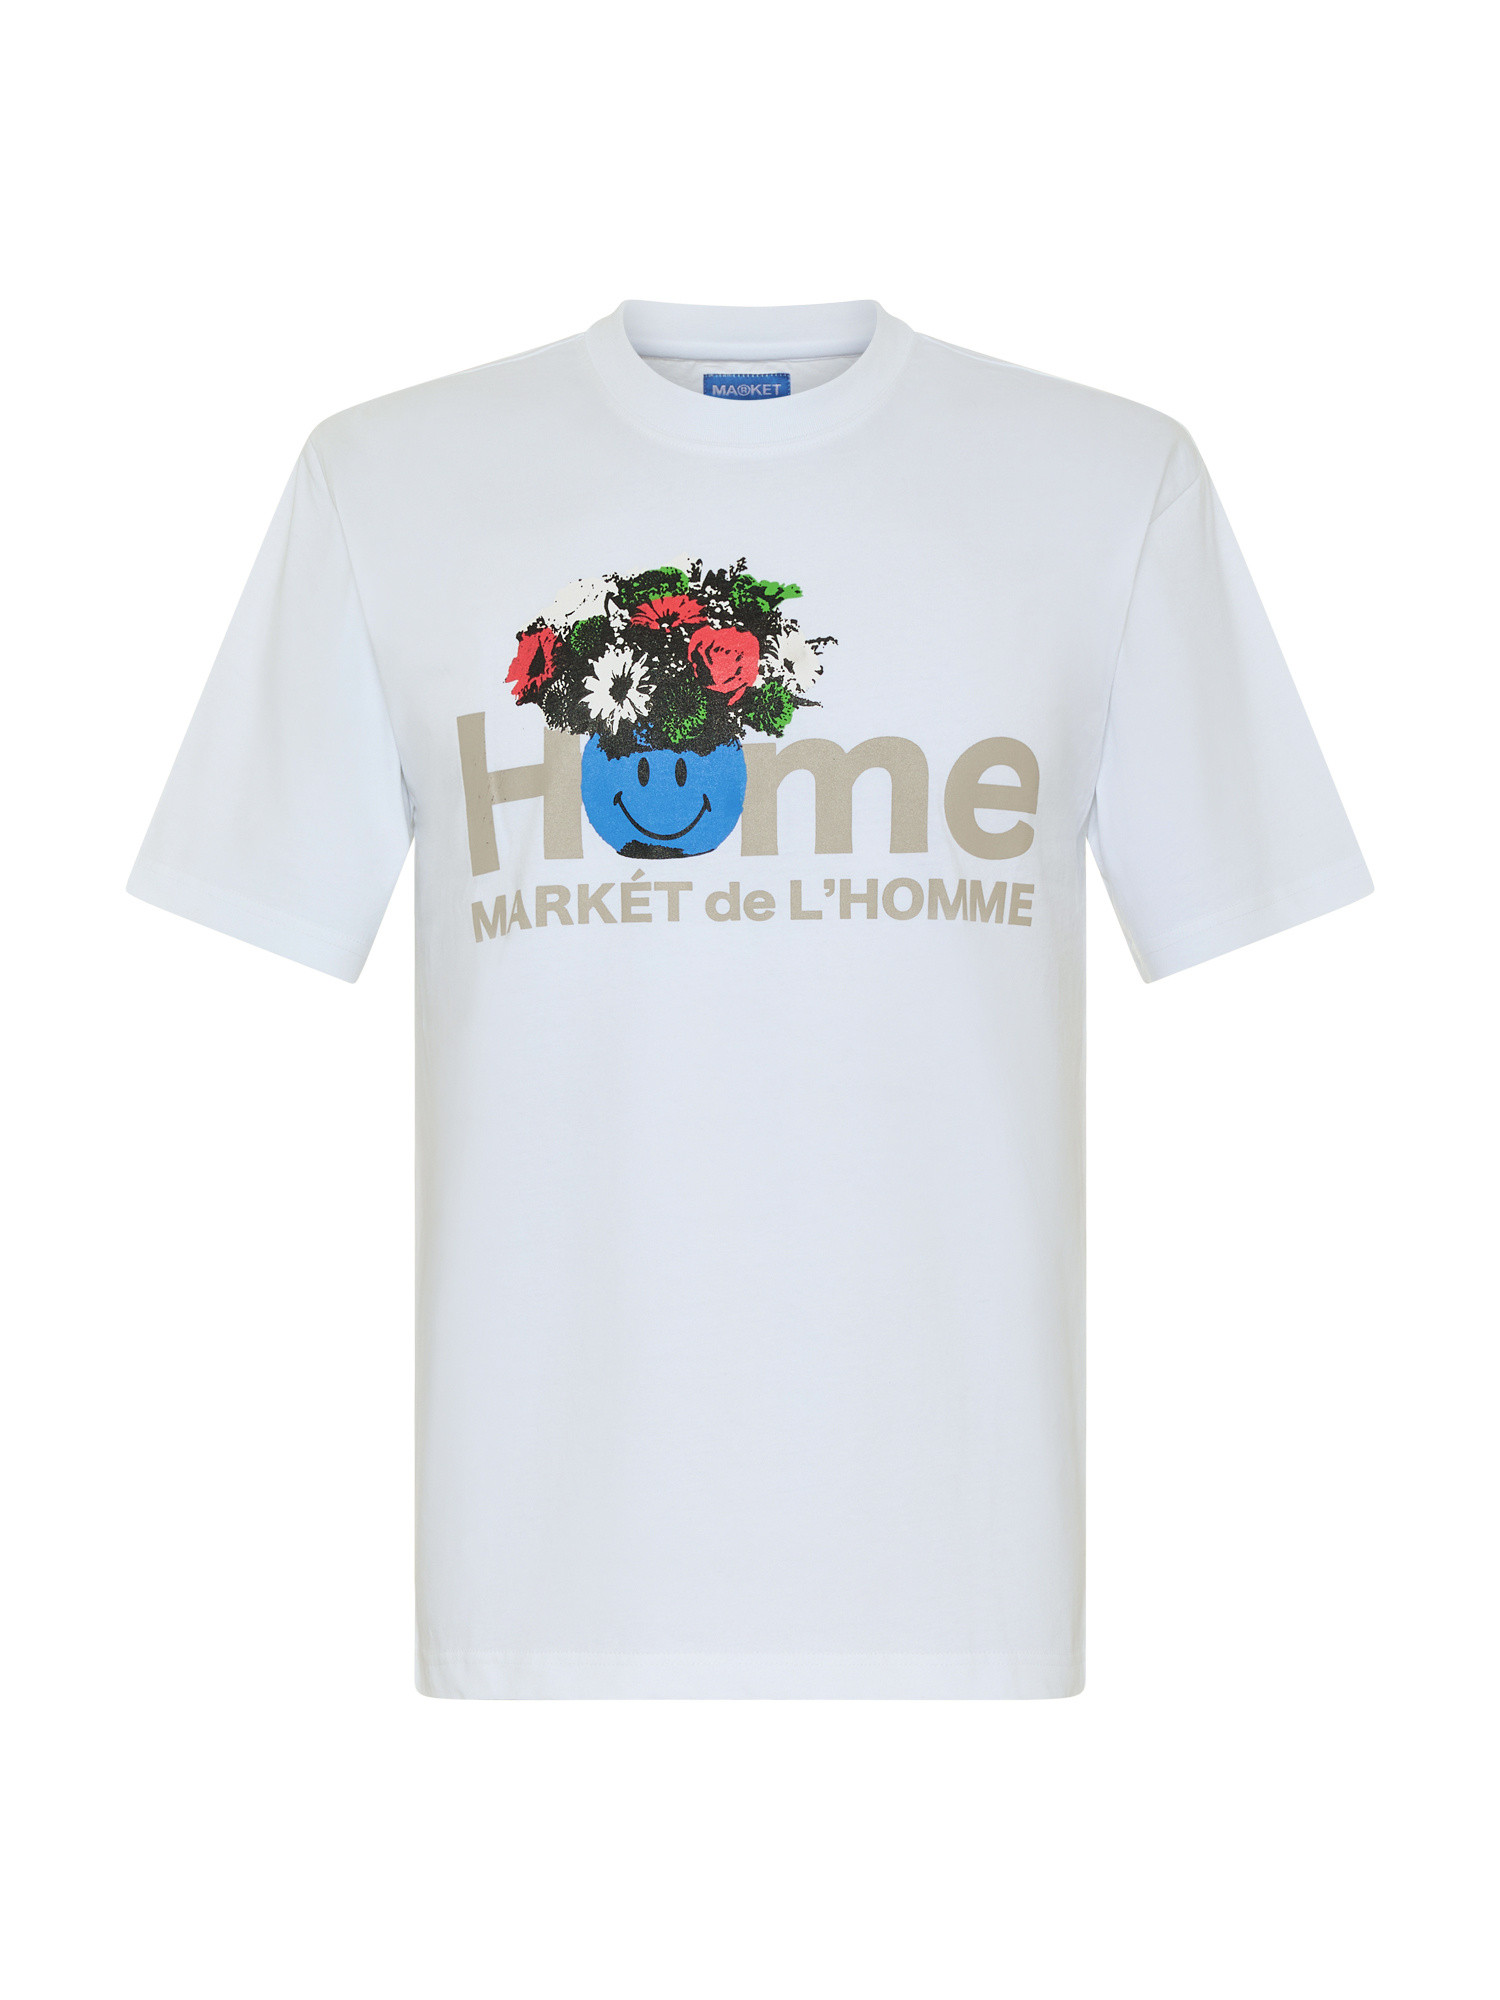 Market - Cotton T-shirt with print, White, large image number 0